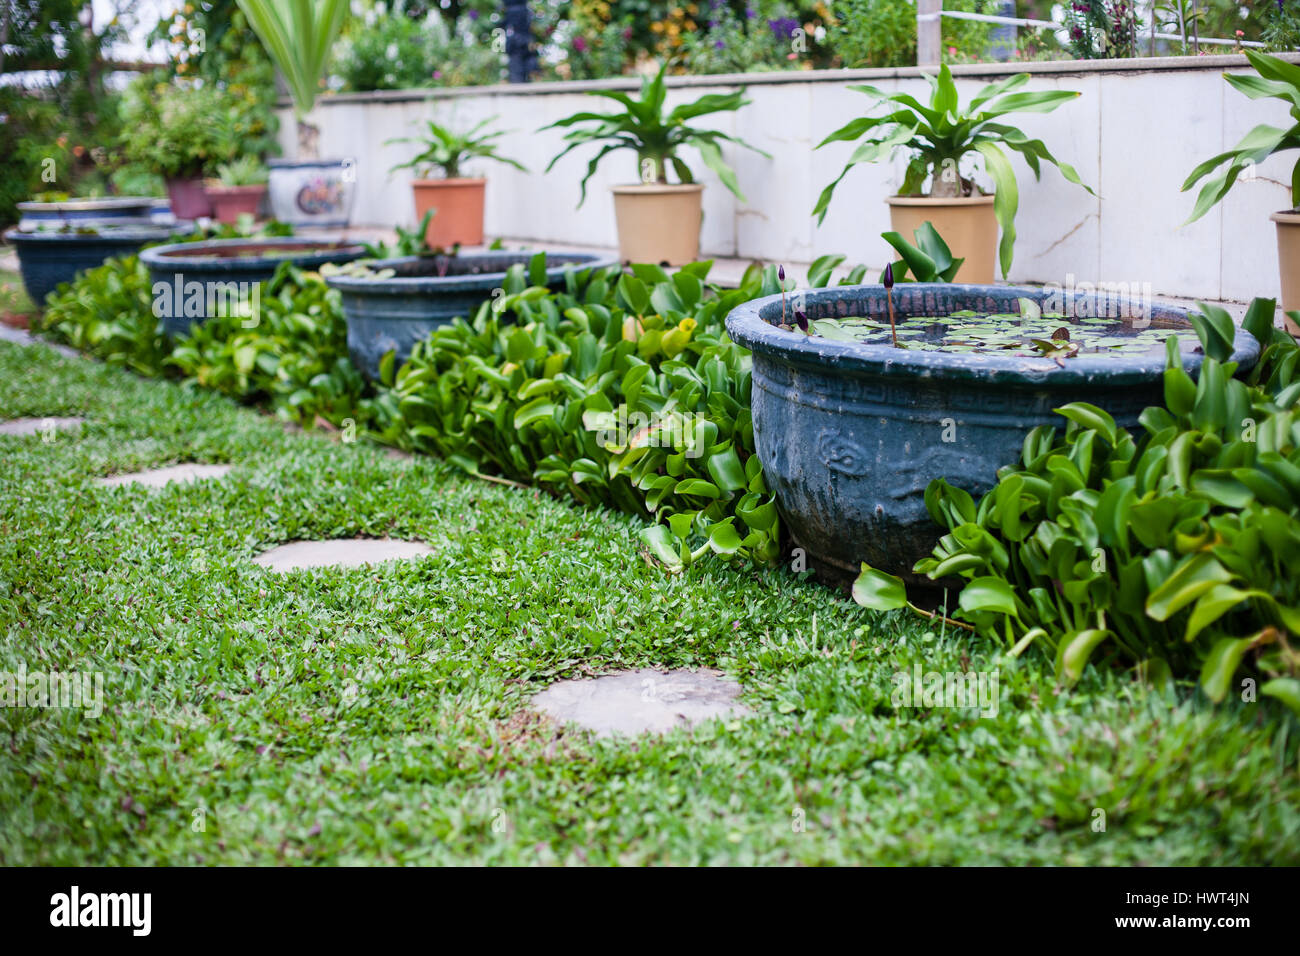 Plants, flowerpots, flowerbed the largest Buddhist temple in South East Asia: Kek Lok Si Malaysia Stock Photo